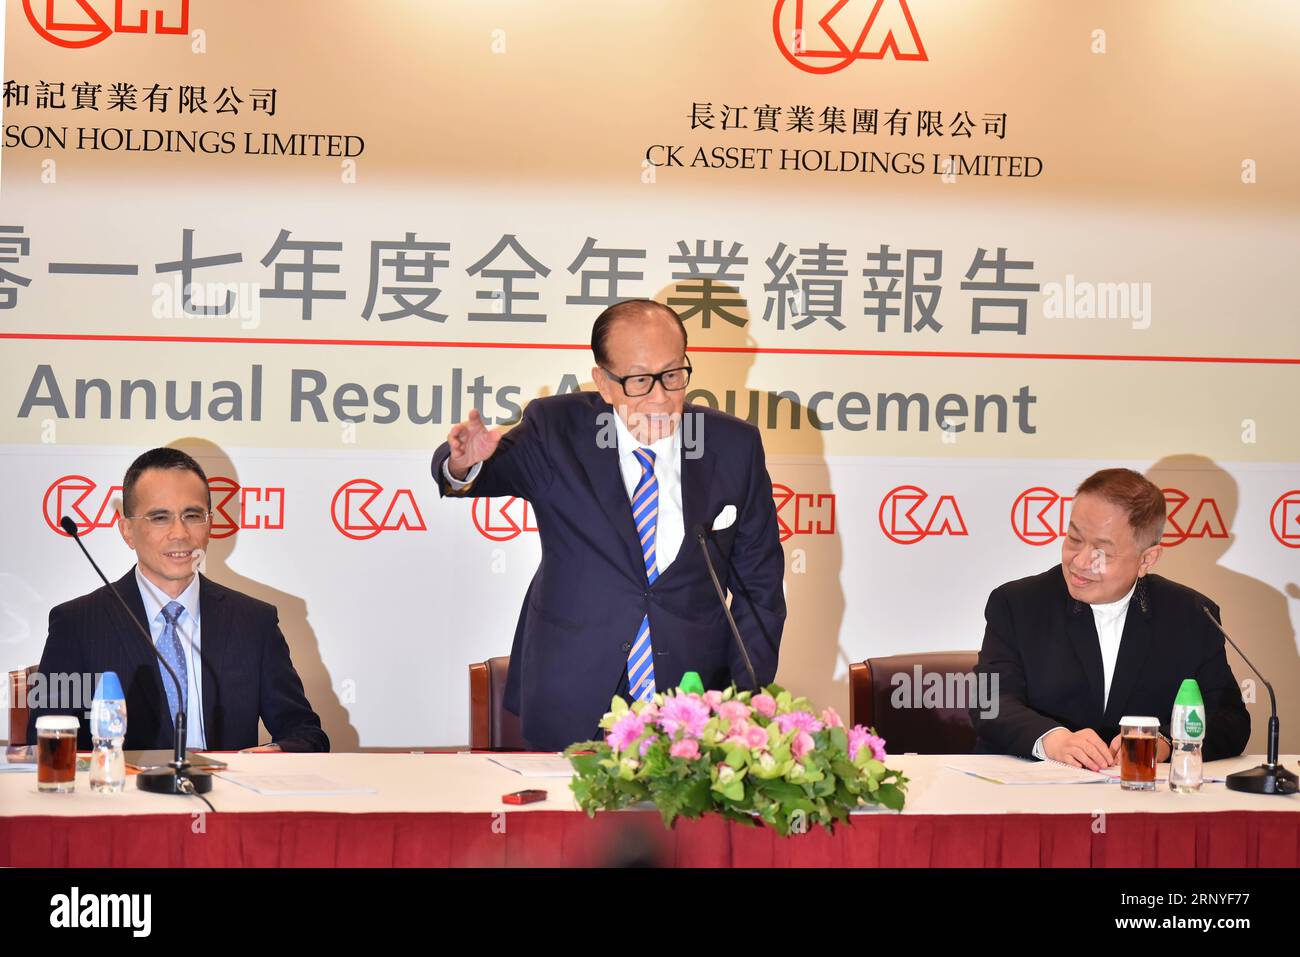 (180316) -- HONG KONG, March 16, 2018 -- Hong Kong tycoon Li Ka-shing (C) attends a press conference in south China s Hong Kong, March 16, 2018. Li Ka-shing said on Friday that he is retiring from his business empire. Li said he would officially step down as the chairman of CK Hutchison Holdings Ltd. and CK Asset holdings Ltd. at the annual general meeting of the company on May 10 and would serve as a senior adviser. He will be succeeded by his elder son Victor Li Tzar Kuoi. ) (lmm) CHINA-HONG KONG-BUSINESS-LI KA-SHING-RETIREMENT (CN) WangxXi PUBLICATIONxNOTxINxCHN Stock Photo